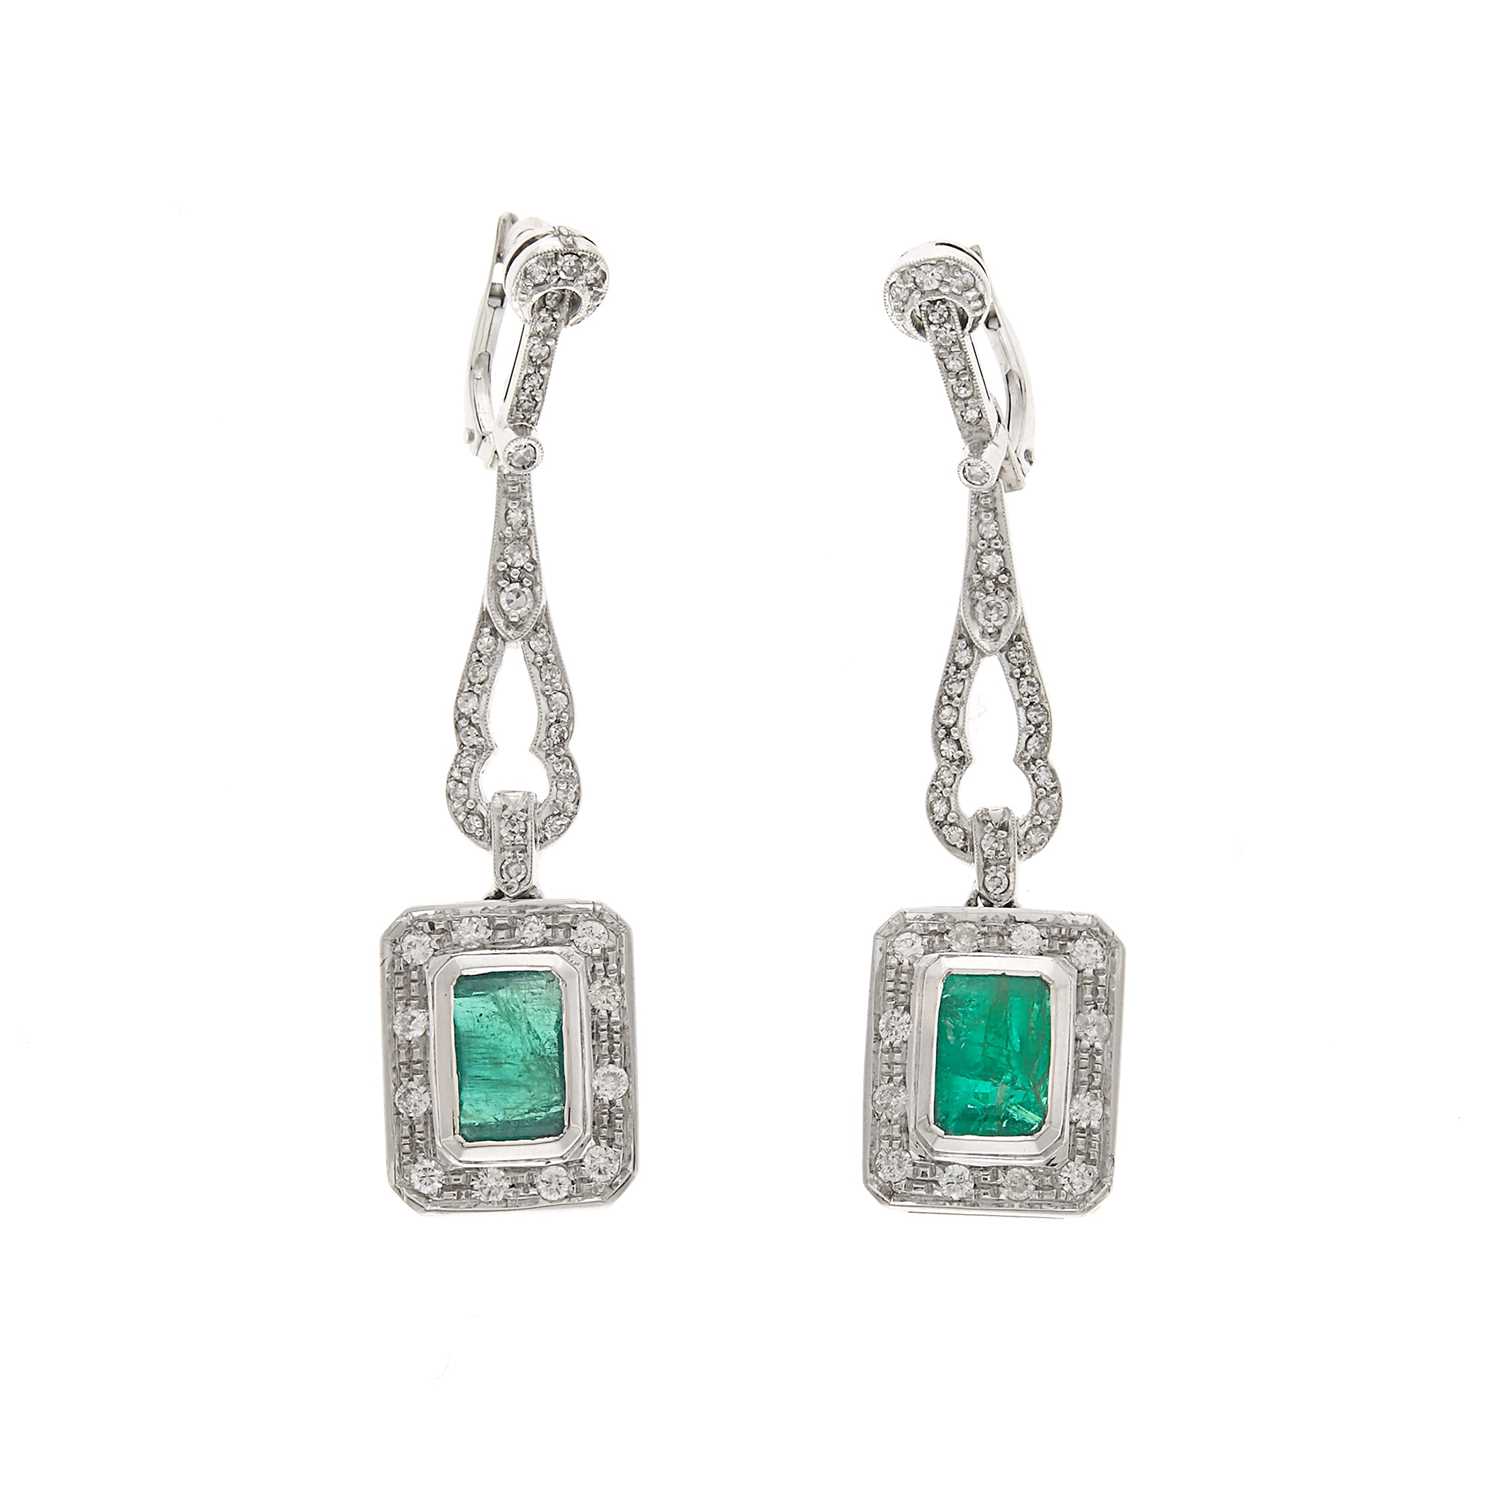 Lot 2065 - Pair of White Gold, Emerald and Diamond Pendant-Earrings